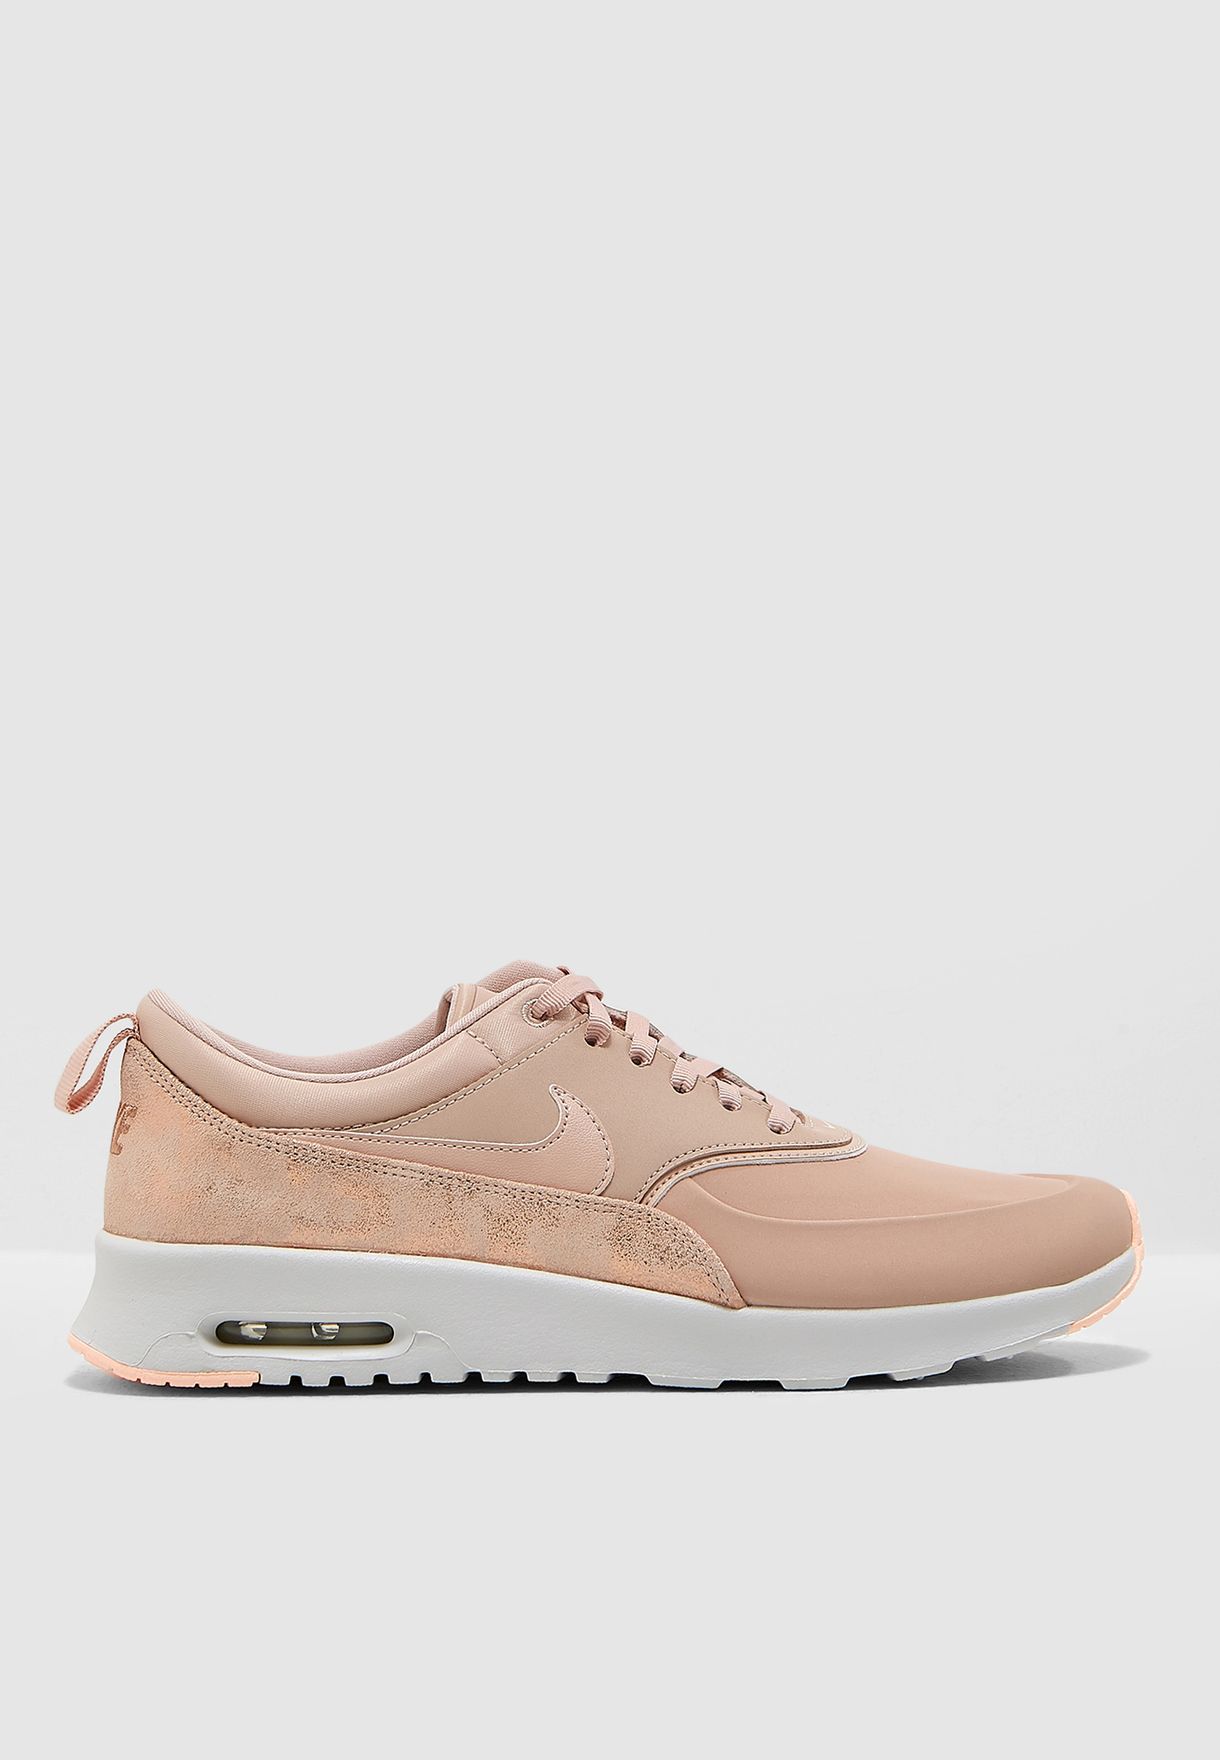 air max thea beige leather